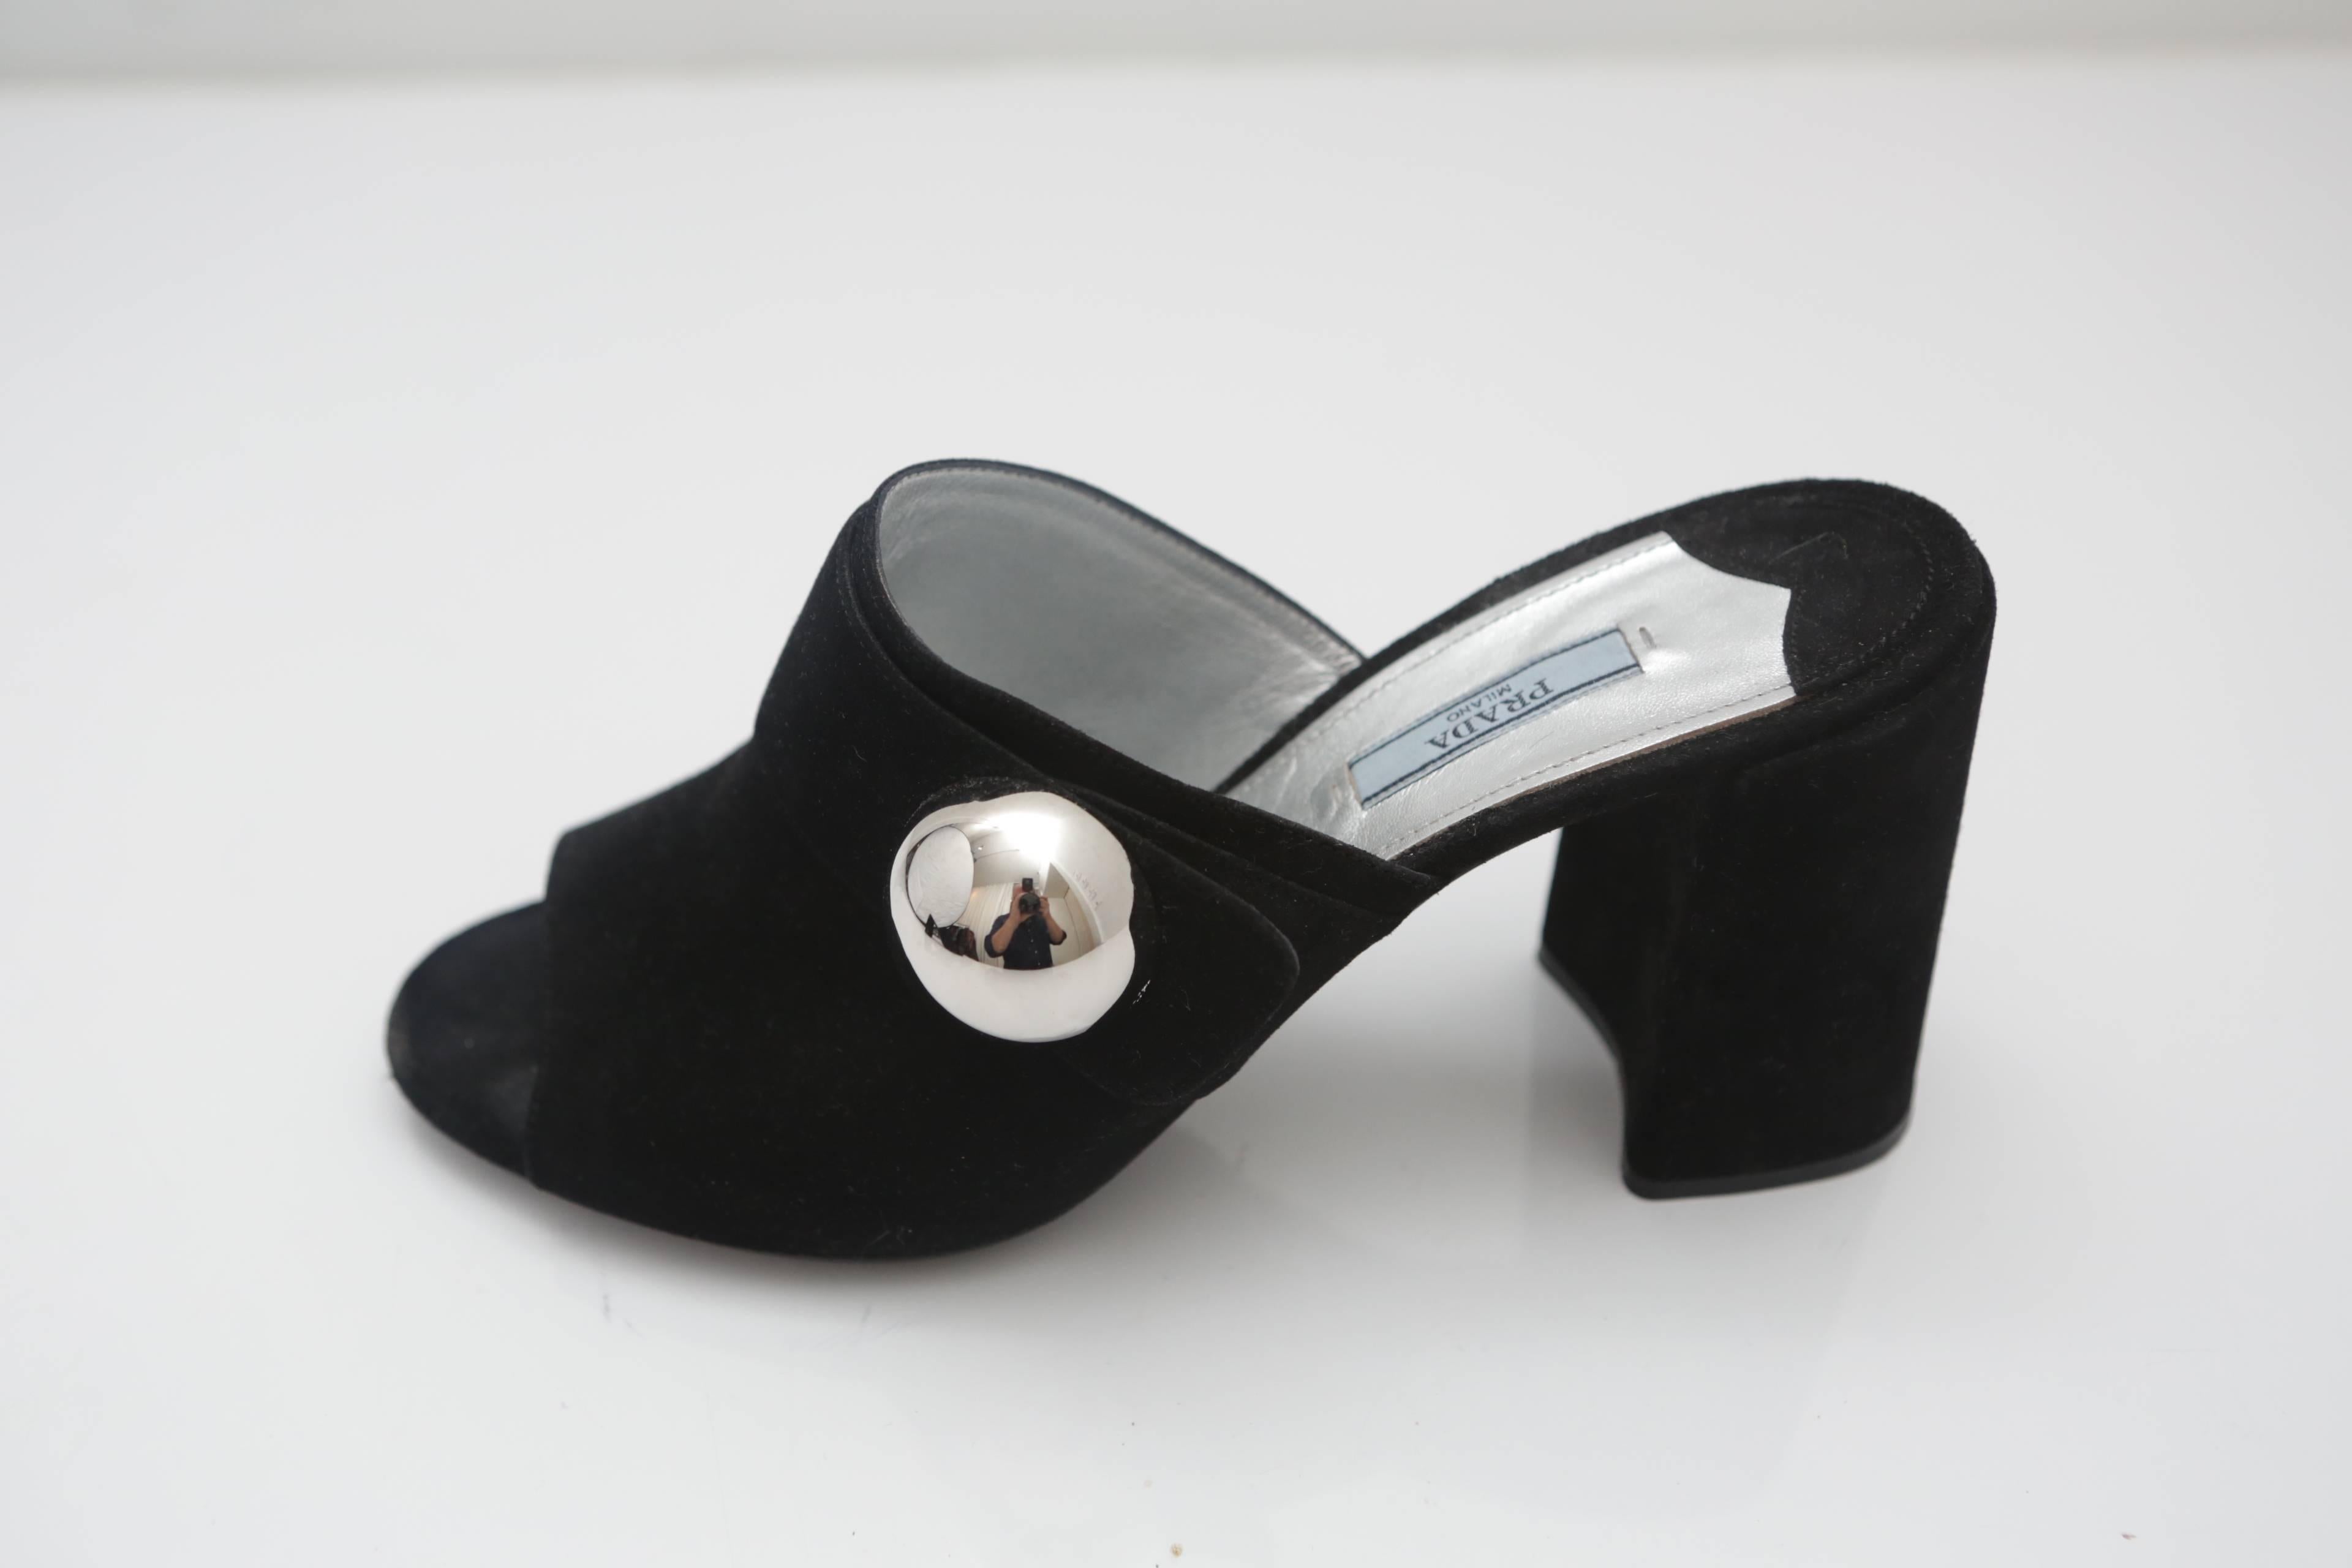 Prada Open-Toe Suede Mules with silver ball on bonded suede. Metallic silver interior with 3